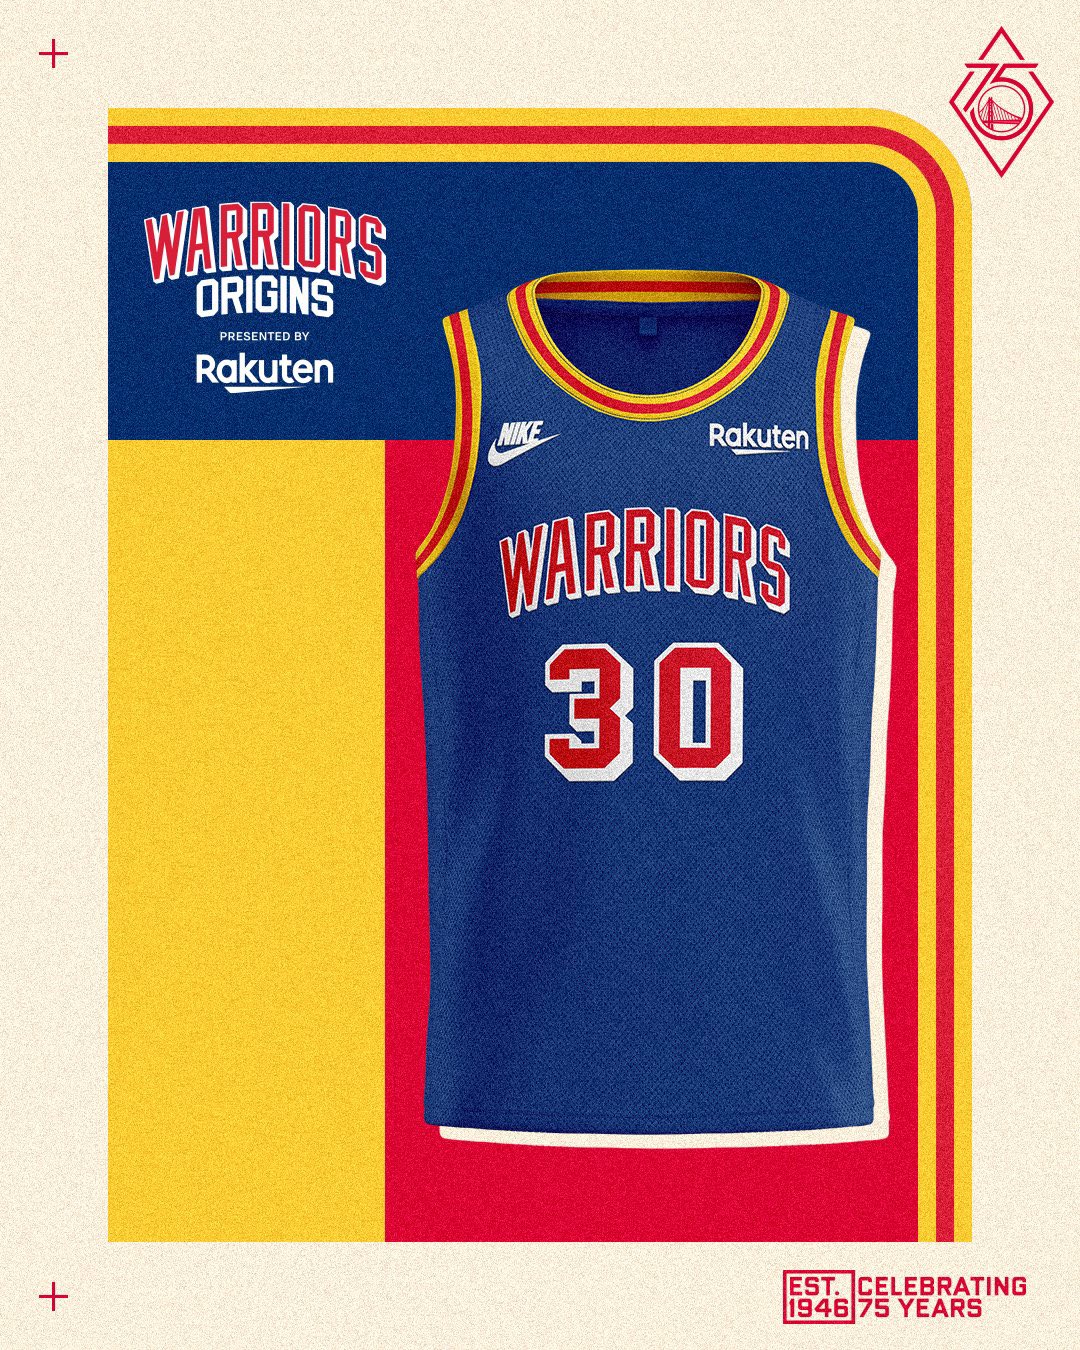 The Game on "Warriors new Origins jersey. Thoughts? (📸 @ warriors) https://t.co/ZzzeBcEbJ2" Twitter